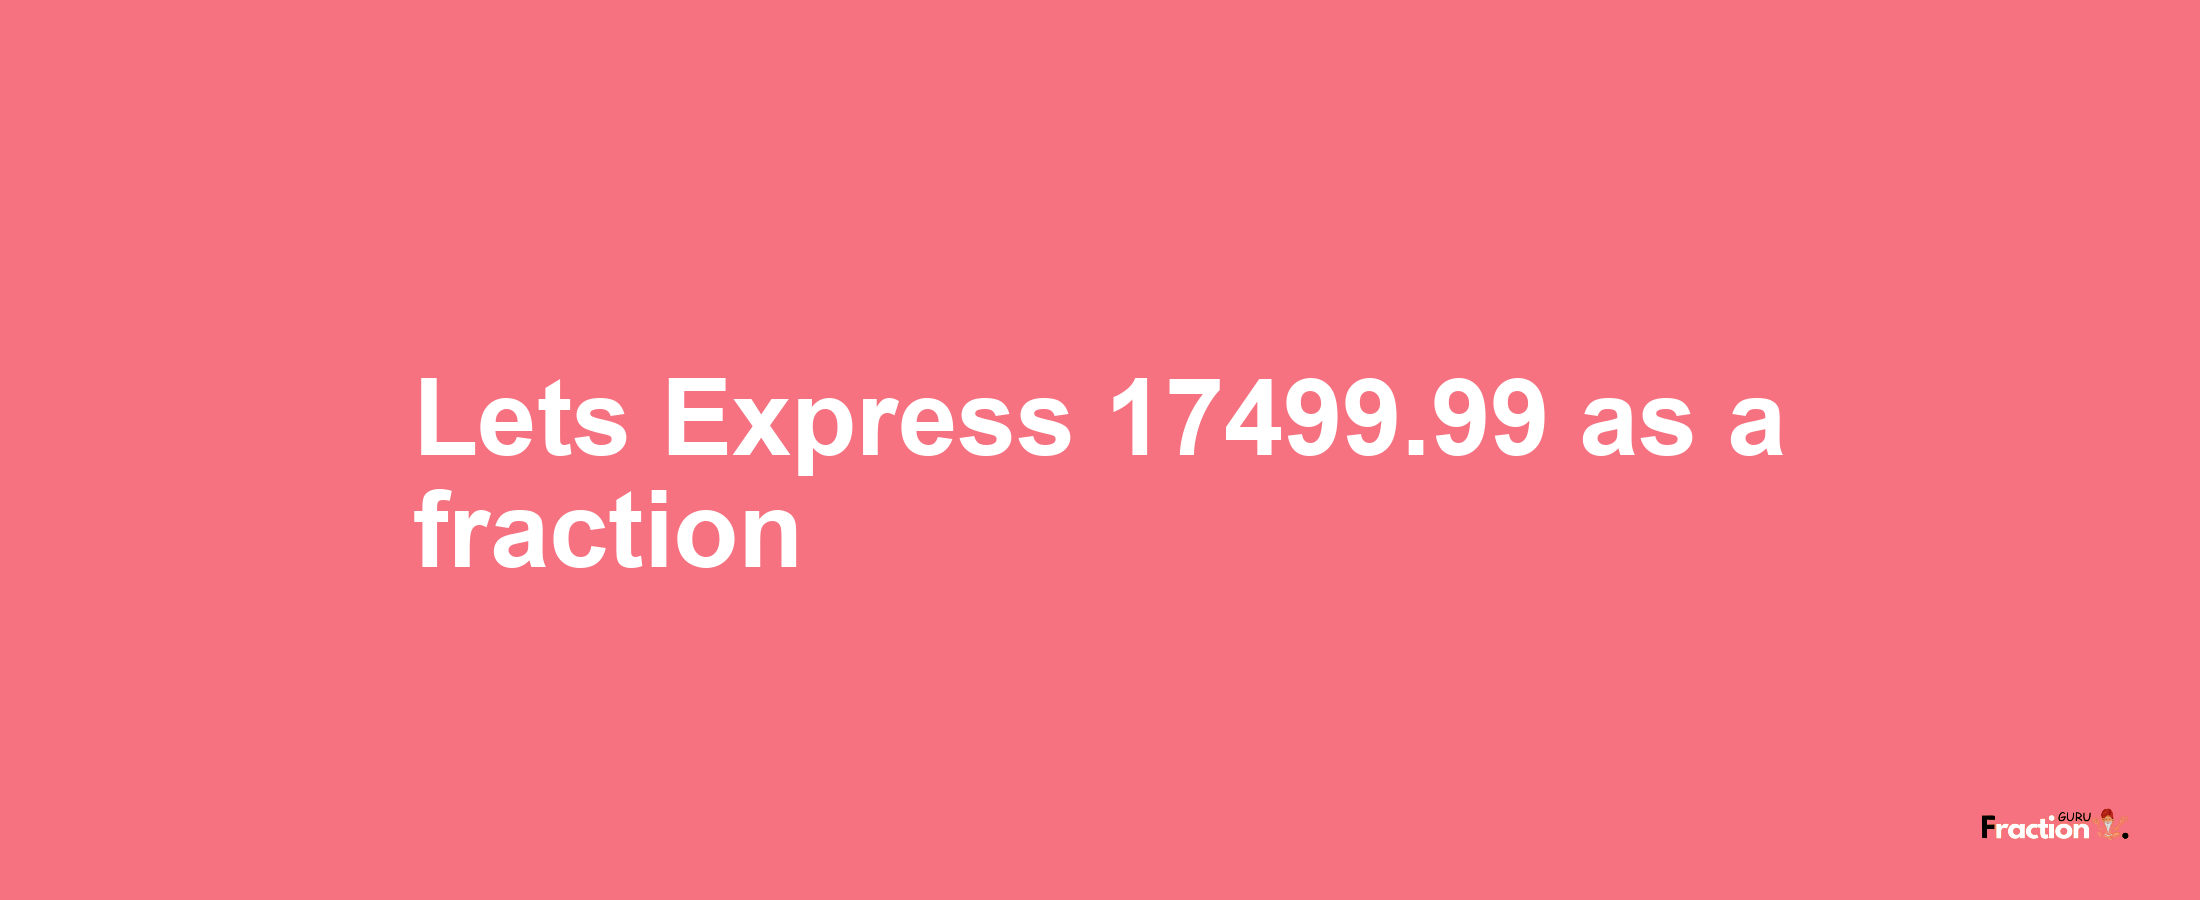 Lets Express 17499.99 as afraction